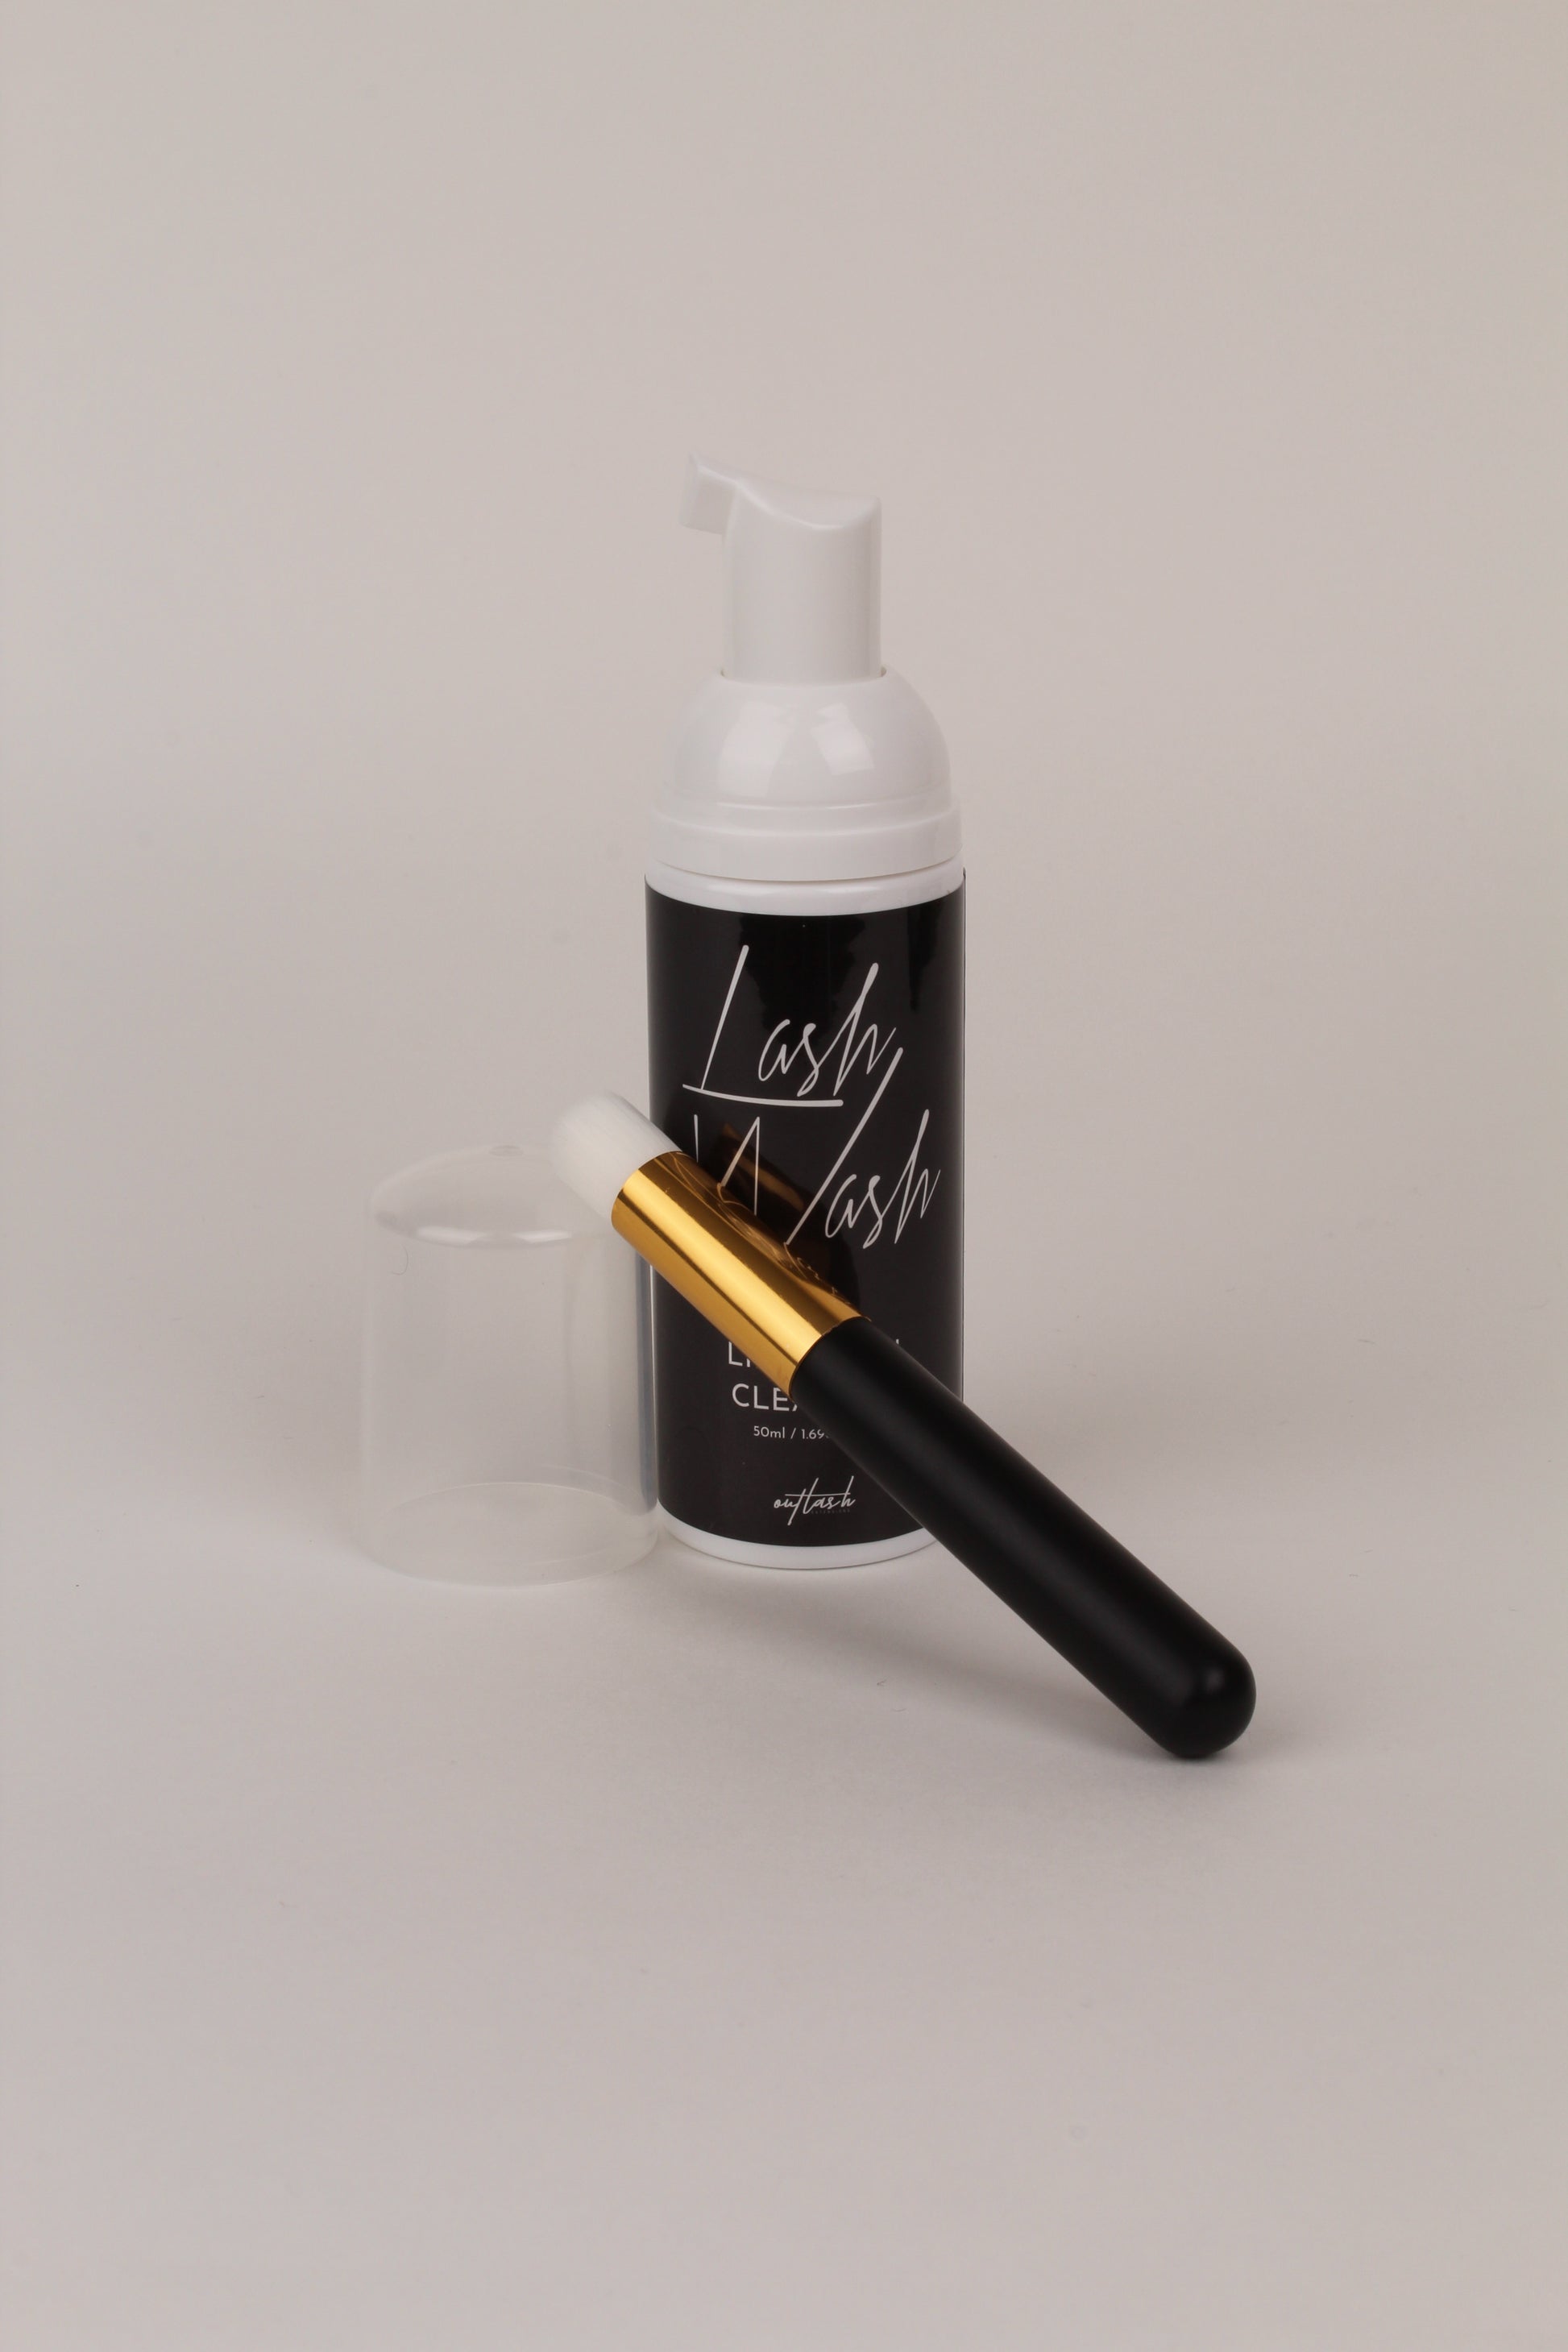 Lid and Lash Cleanser  OutLash Extensions Pro